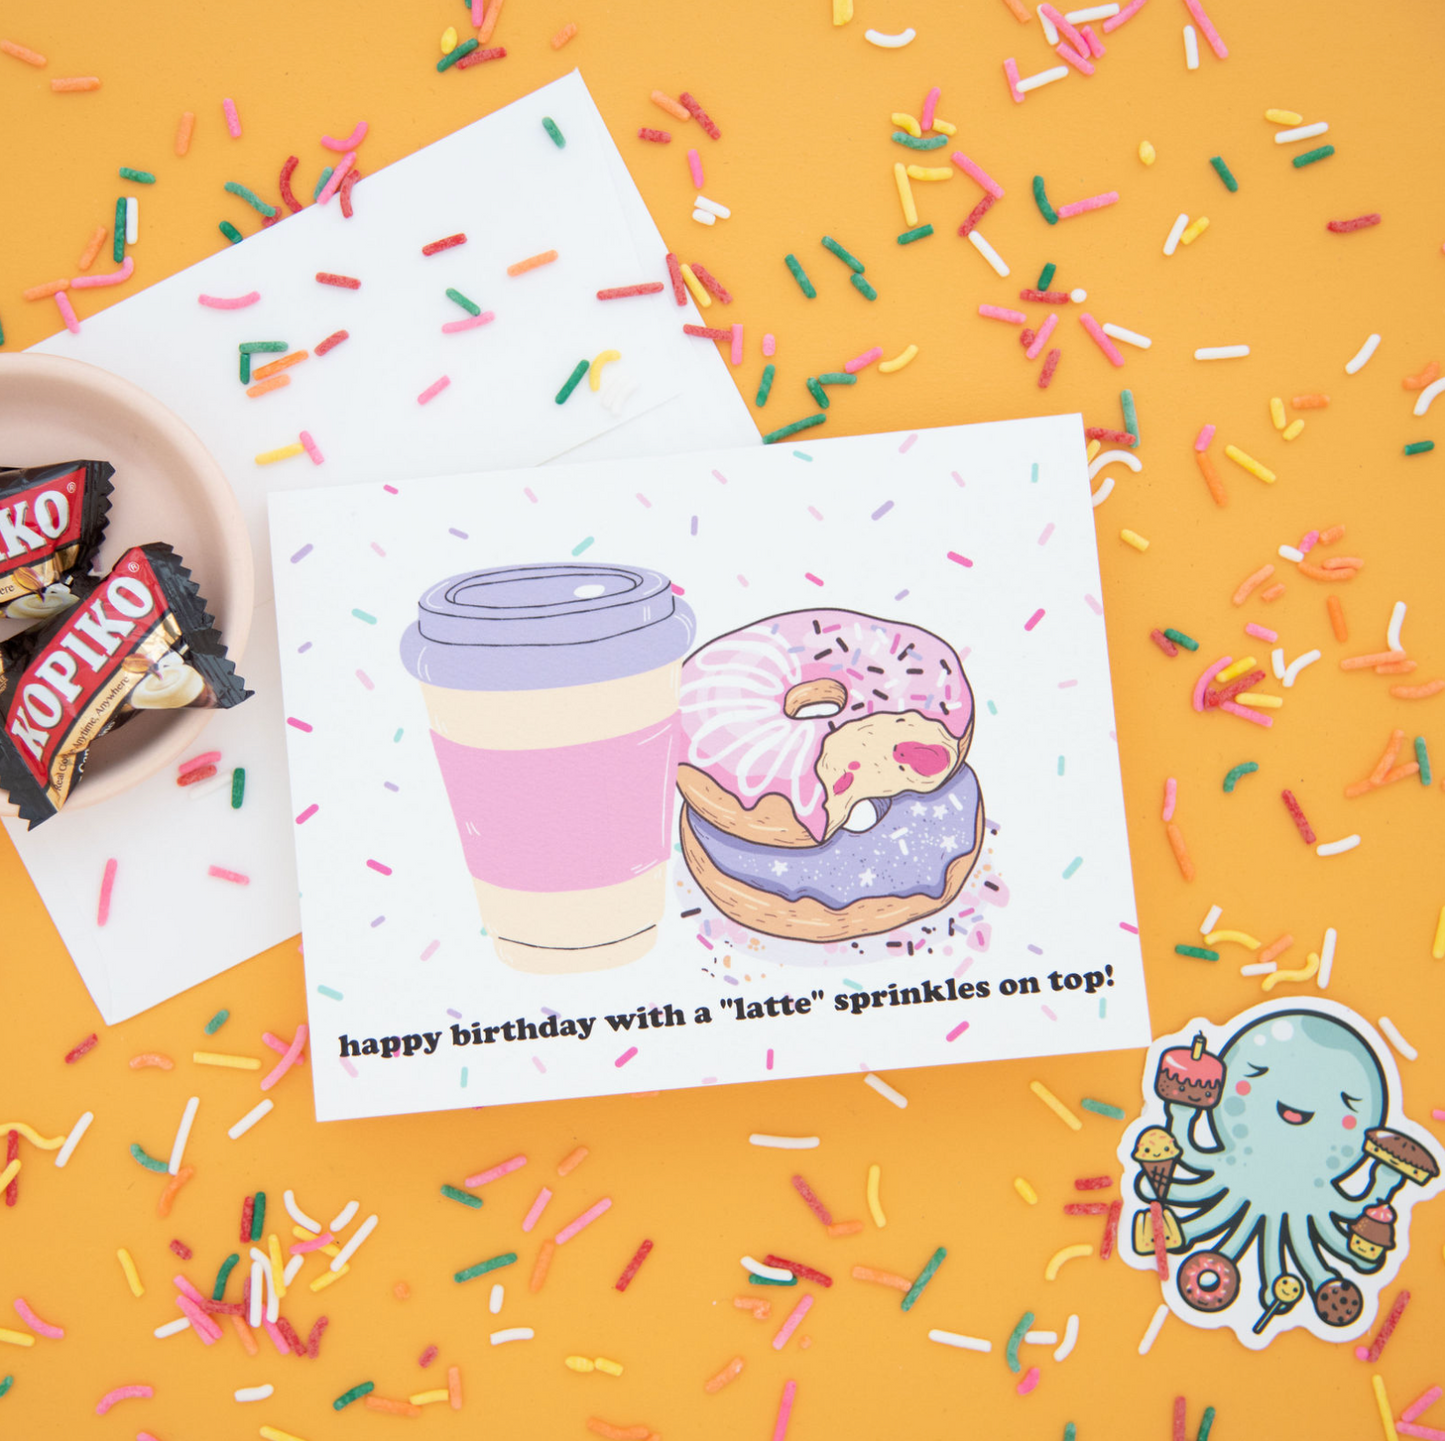 Surprise your loved ones with our delicious and adorable Donut Birthday Card and Coffee Candy Subscription Box! Featuring a happy birthday donut card surrounded by colorful sprinkles, a stack of two mouth-watering donuts, and a hot cup of coffee. Along with a sweet treat of Kopiko coffee candy on a vibrant yellow background and an octopus sticker with donuts in the corner. Perfect for any coffee and donut lover! Order now and indulge in the sweetness of life.